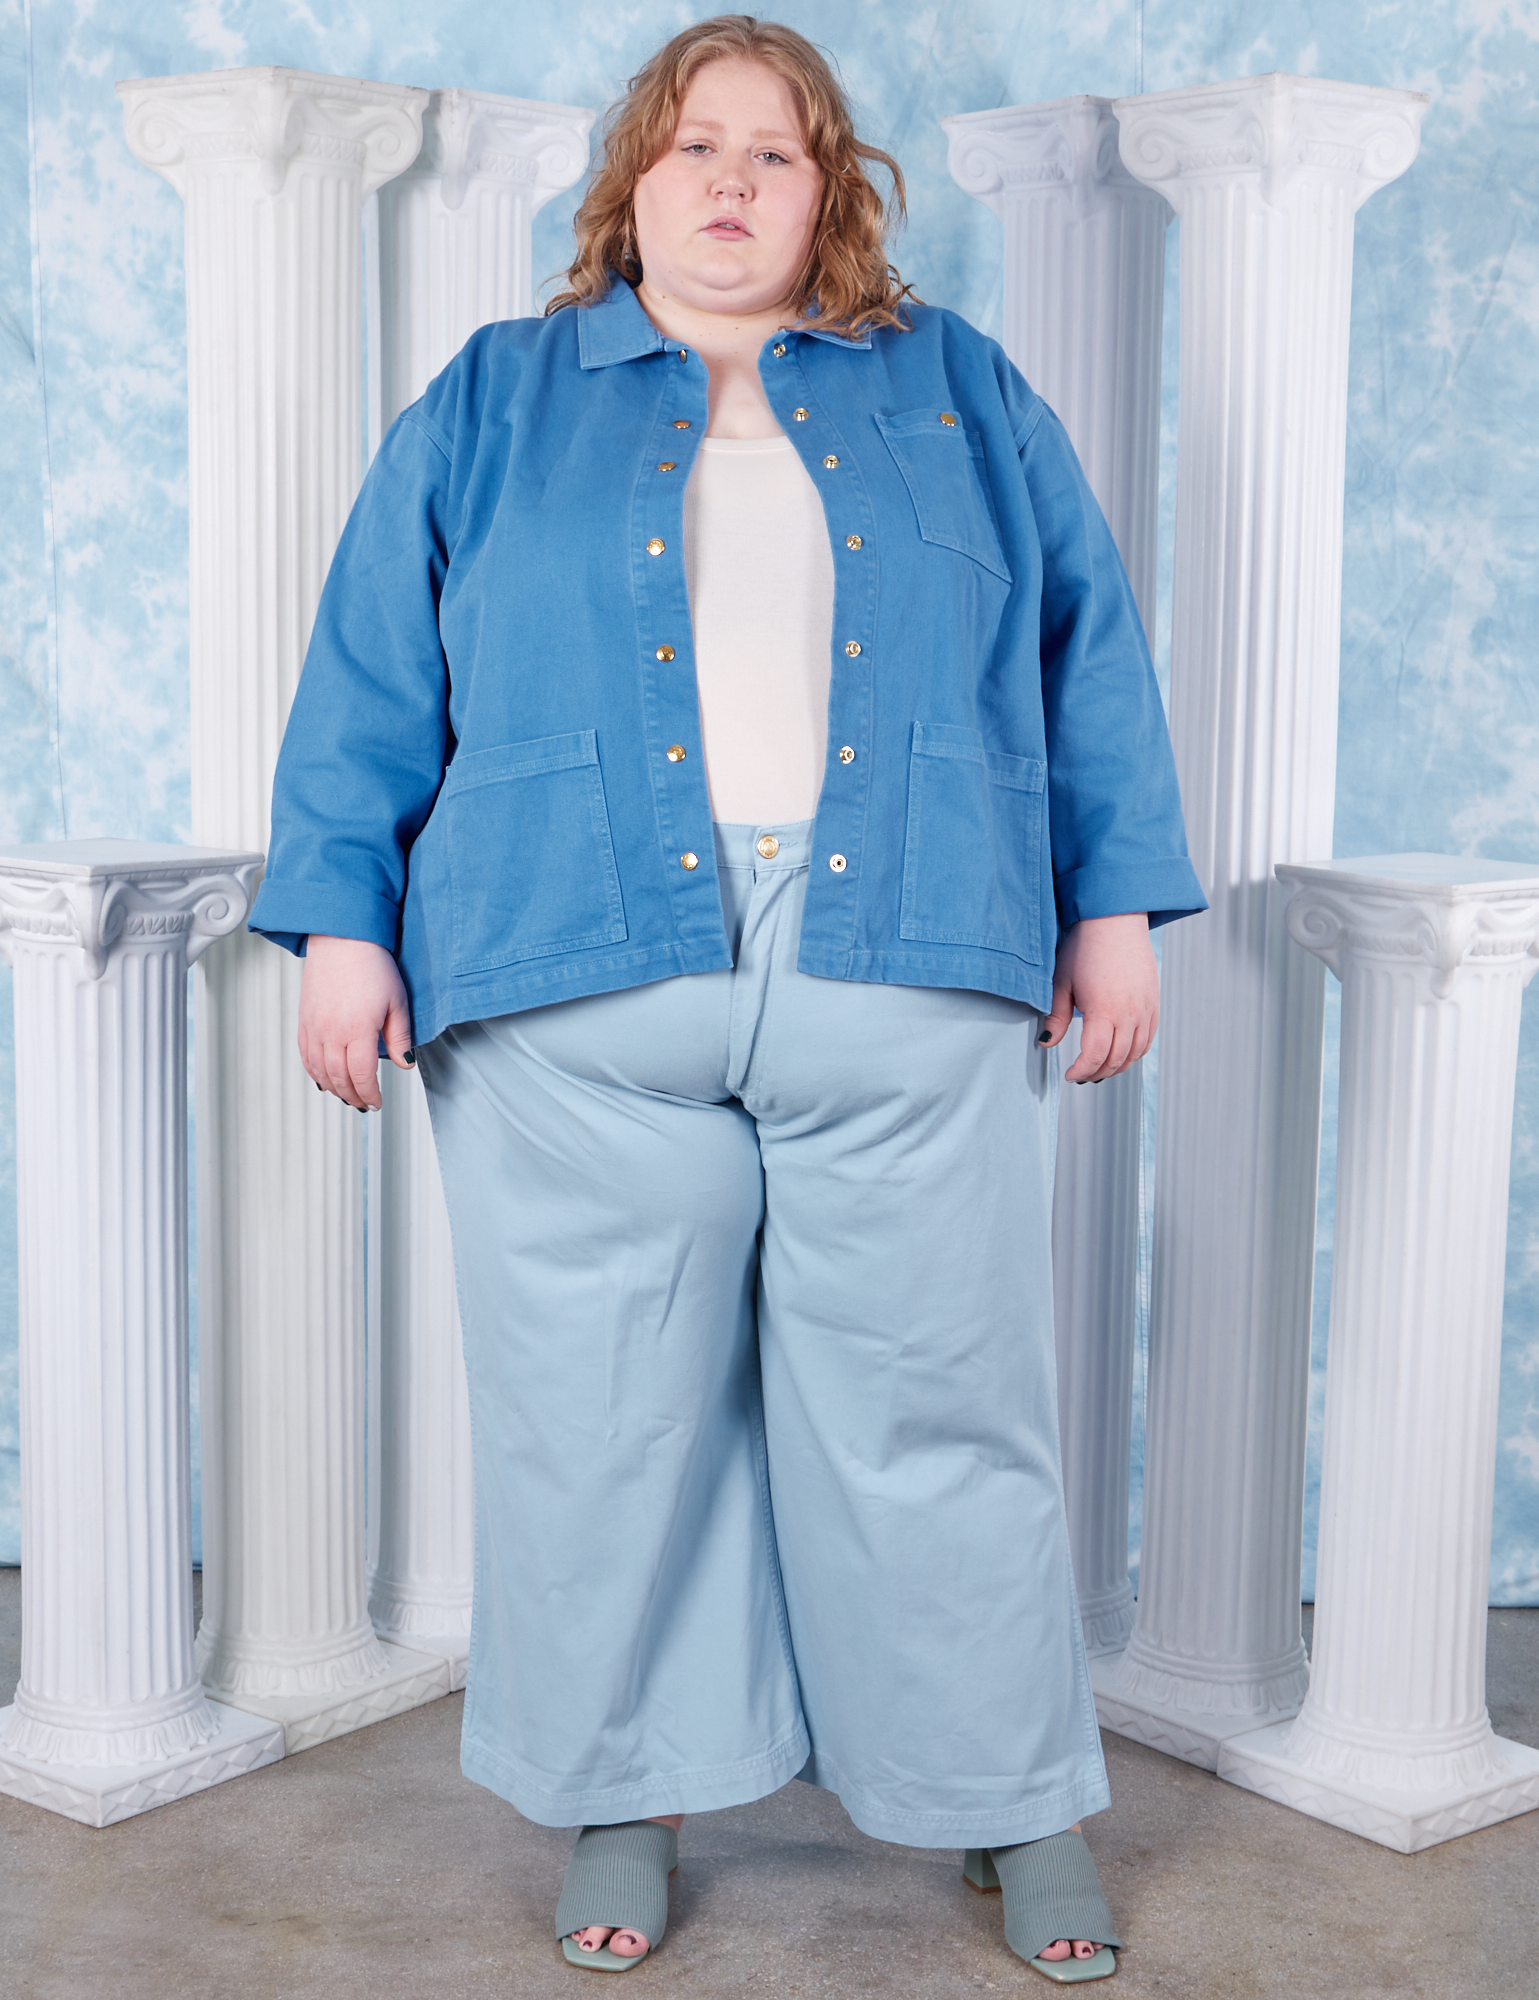 Neoclassical Work Jacket in Blue Venus on Catie wearing vintage off-white Tank Top and baby blue Bell Bottoms